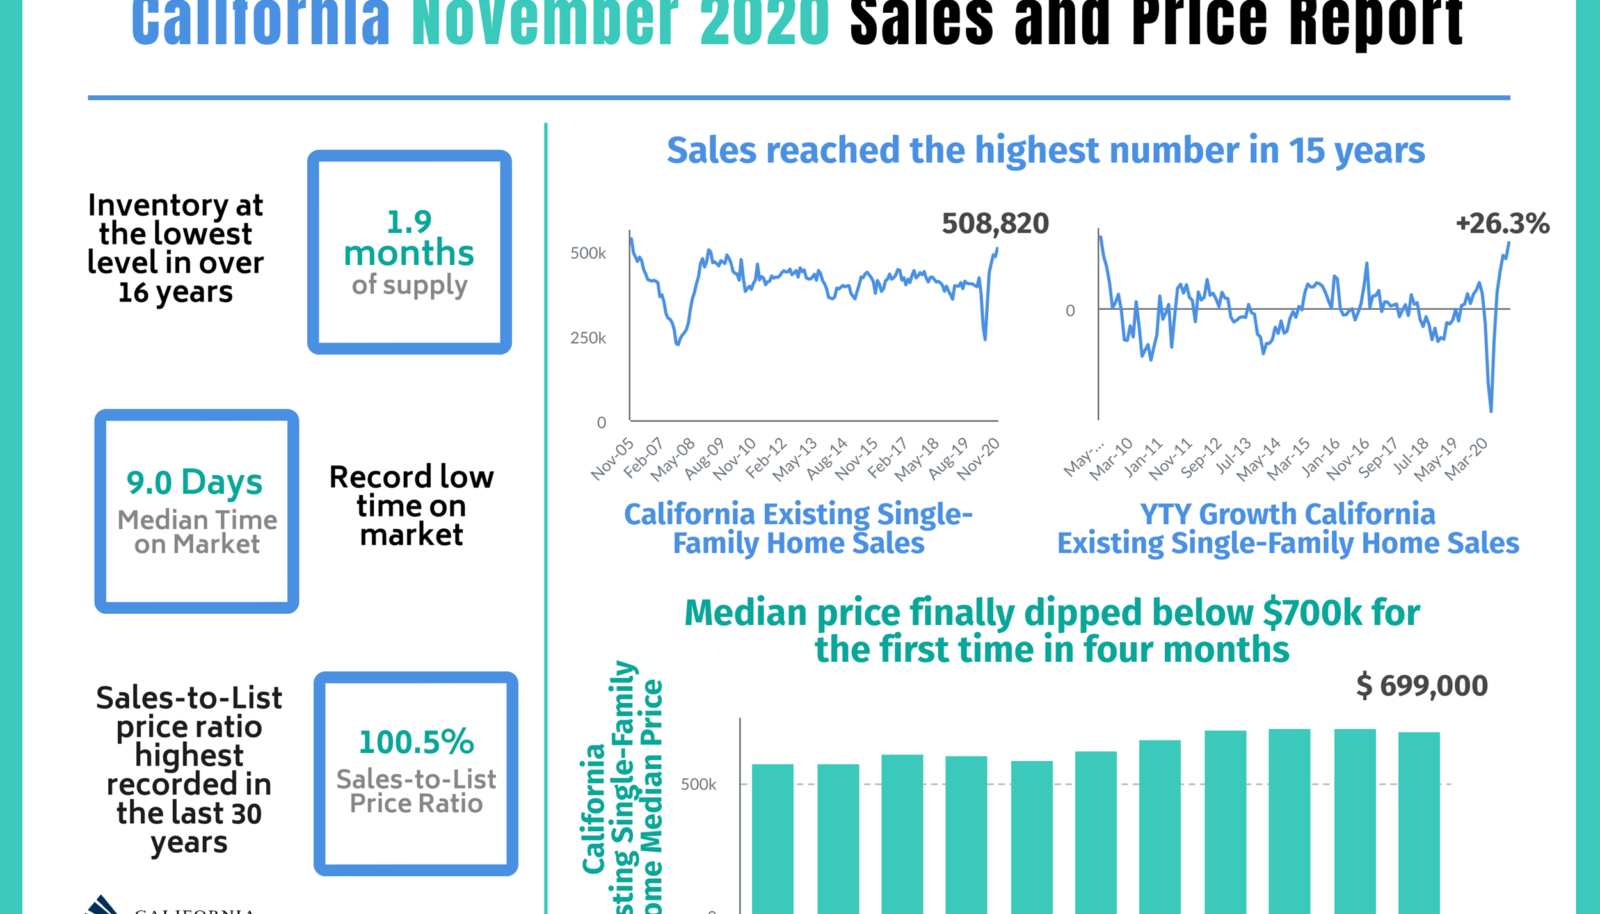 November’s Sales and Price Report for 2020